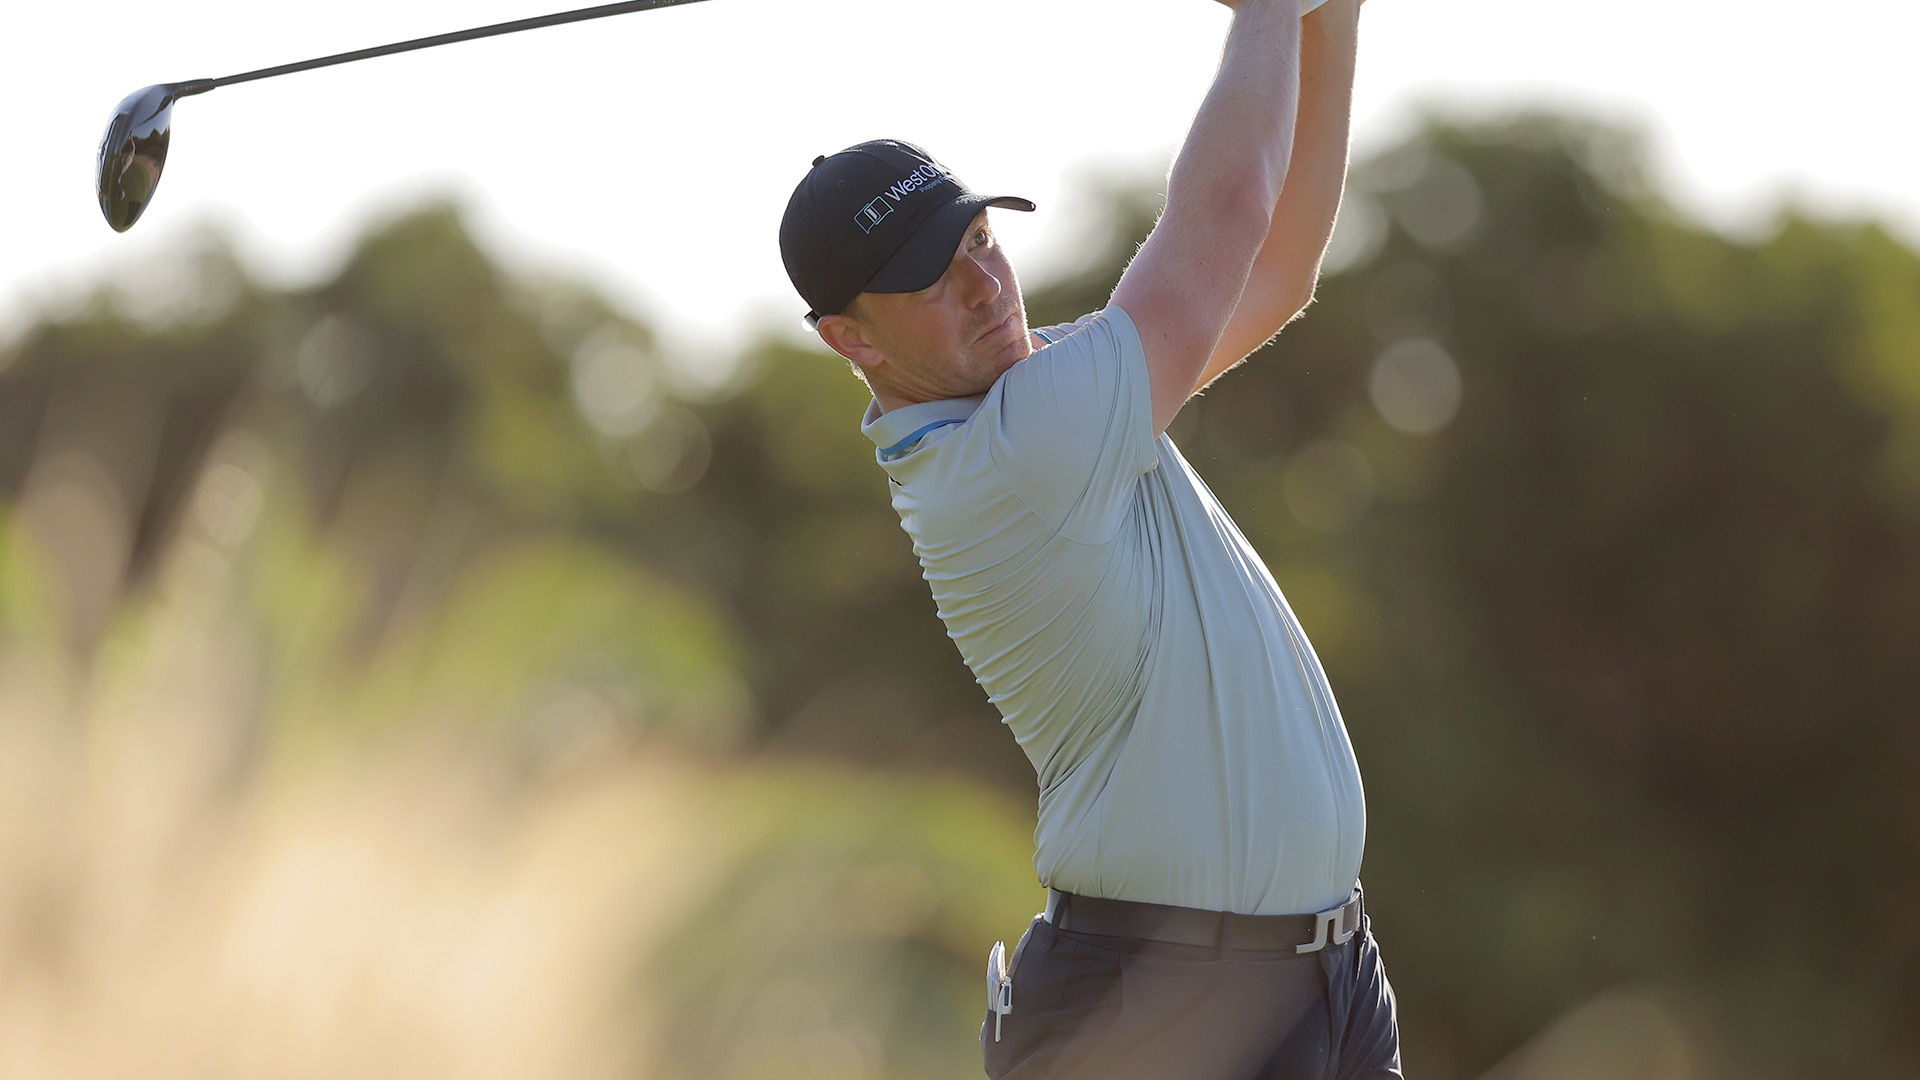 Matt Wallace takes 36-hole lead in Dominican Republic at Corales Puntacana